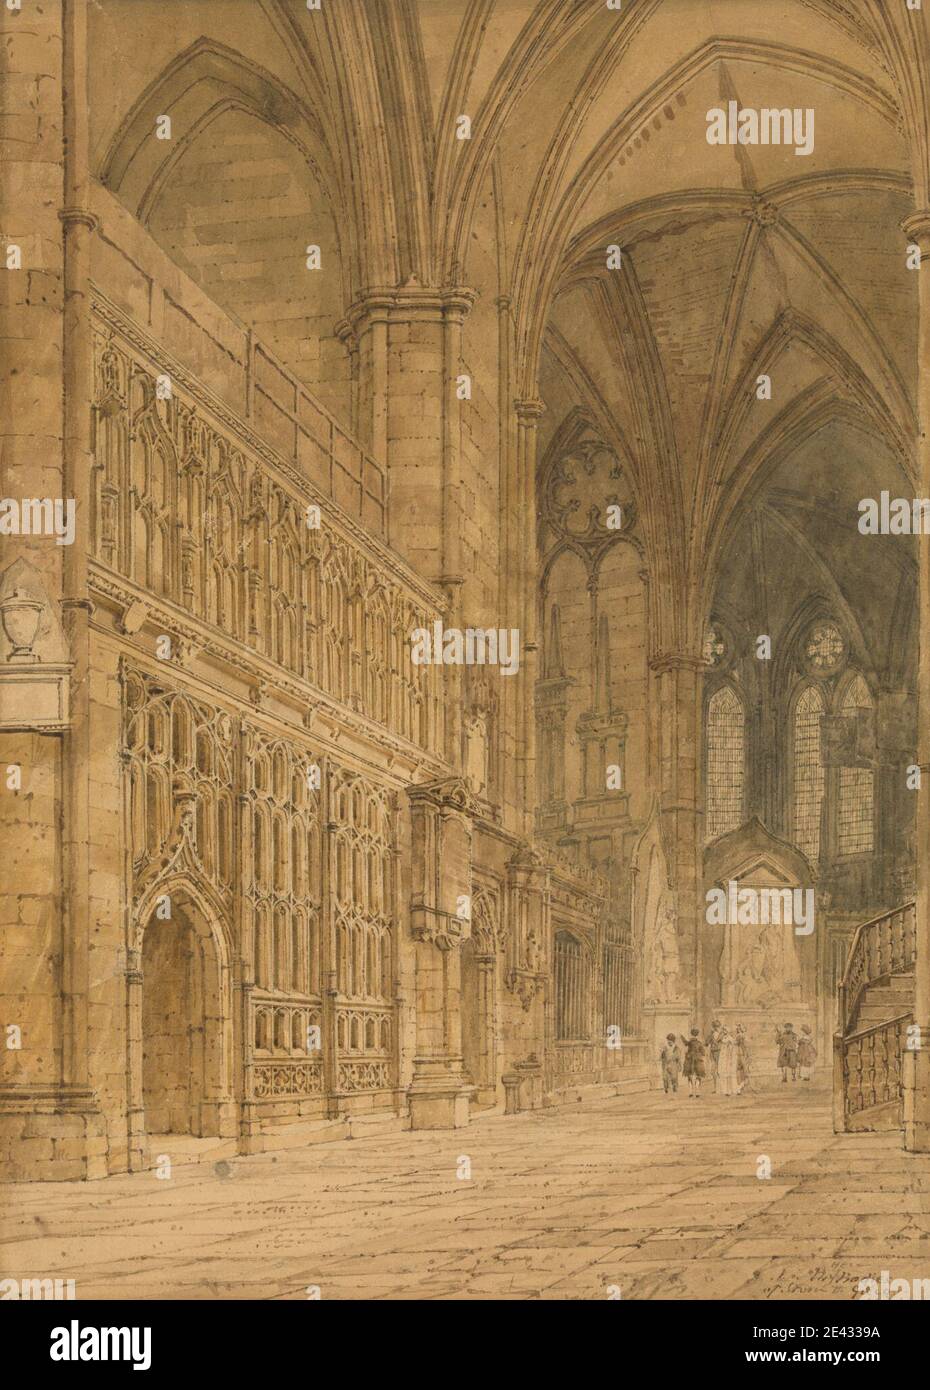 Frederick Nash, 1782–1856, British, Ambulatory, Westminster Abbey, undated. Watercolor and graphite with pen and brown ink on medium, slightly textured, cream wove paper mounted on moderately thick, slightly textured, cream wove paper.   abbey , ambulatory , arches , architectural subject , blind arches , chapel , church , Gothic architectural decoration , Gothic churches , Gothic interior decoration , interior (space) , mullions , niches , people , pillars , rib vaults , rose windows , tombs , vaulted ceilings. City of Westminster , England , Europe , Greater London , London , United Kingdom Stock Photo